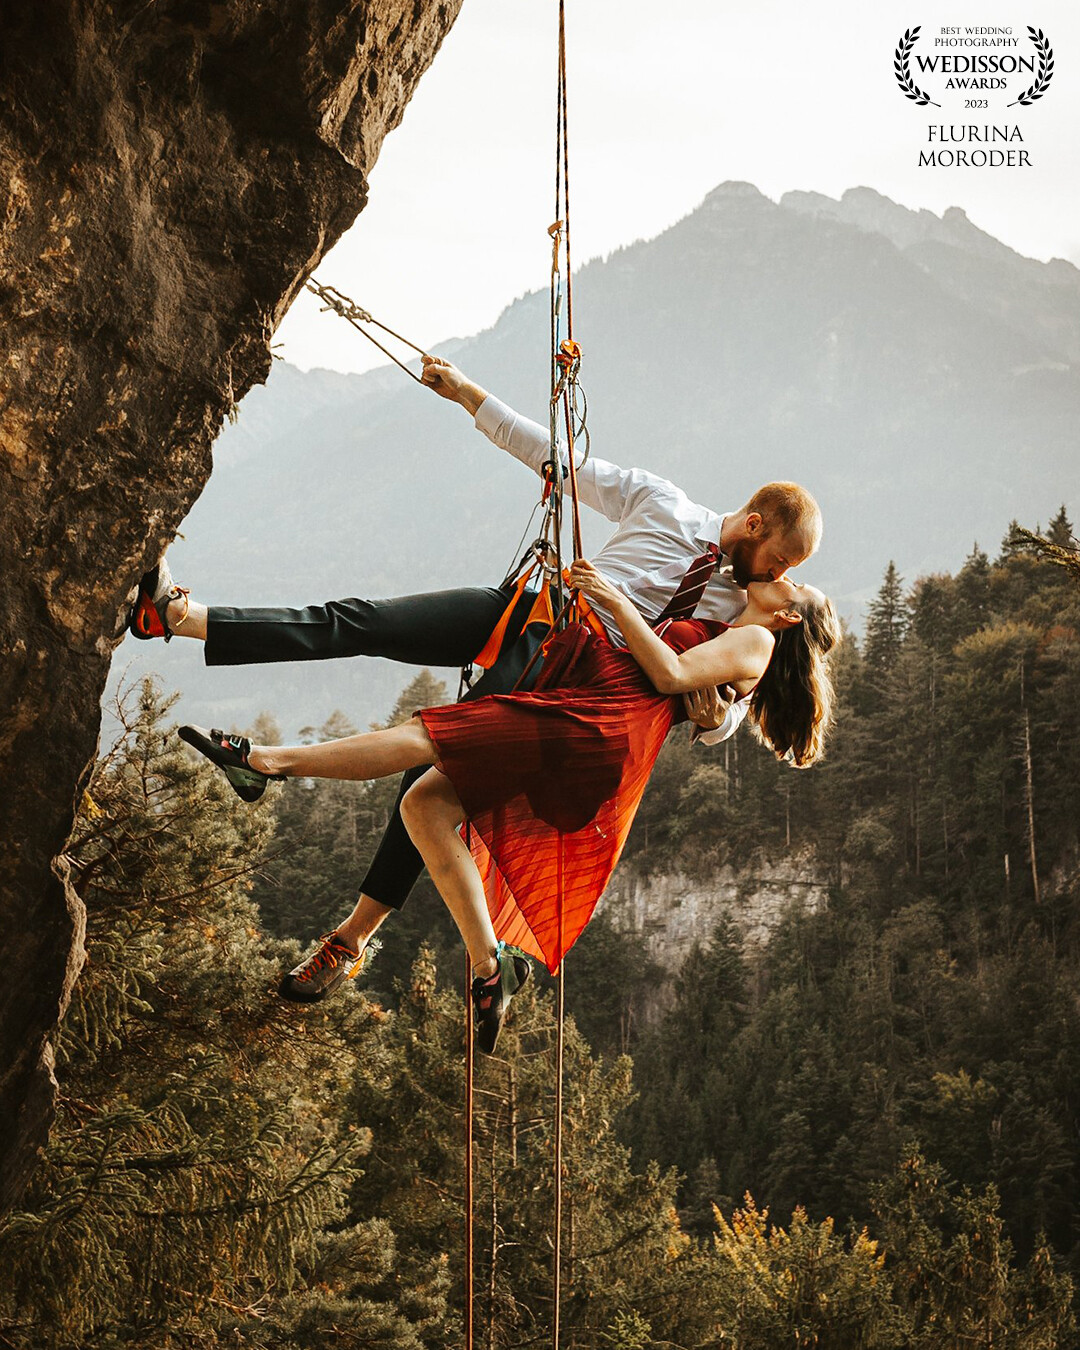 This engagement photo captures the essence of this couples love – a union forged in the mountains, where every peak climbed becomes a shared triumph and every challenge conquered strengthens the bond between these two adventurous souls as they embark on the journey of a lifetime together.